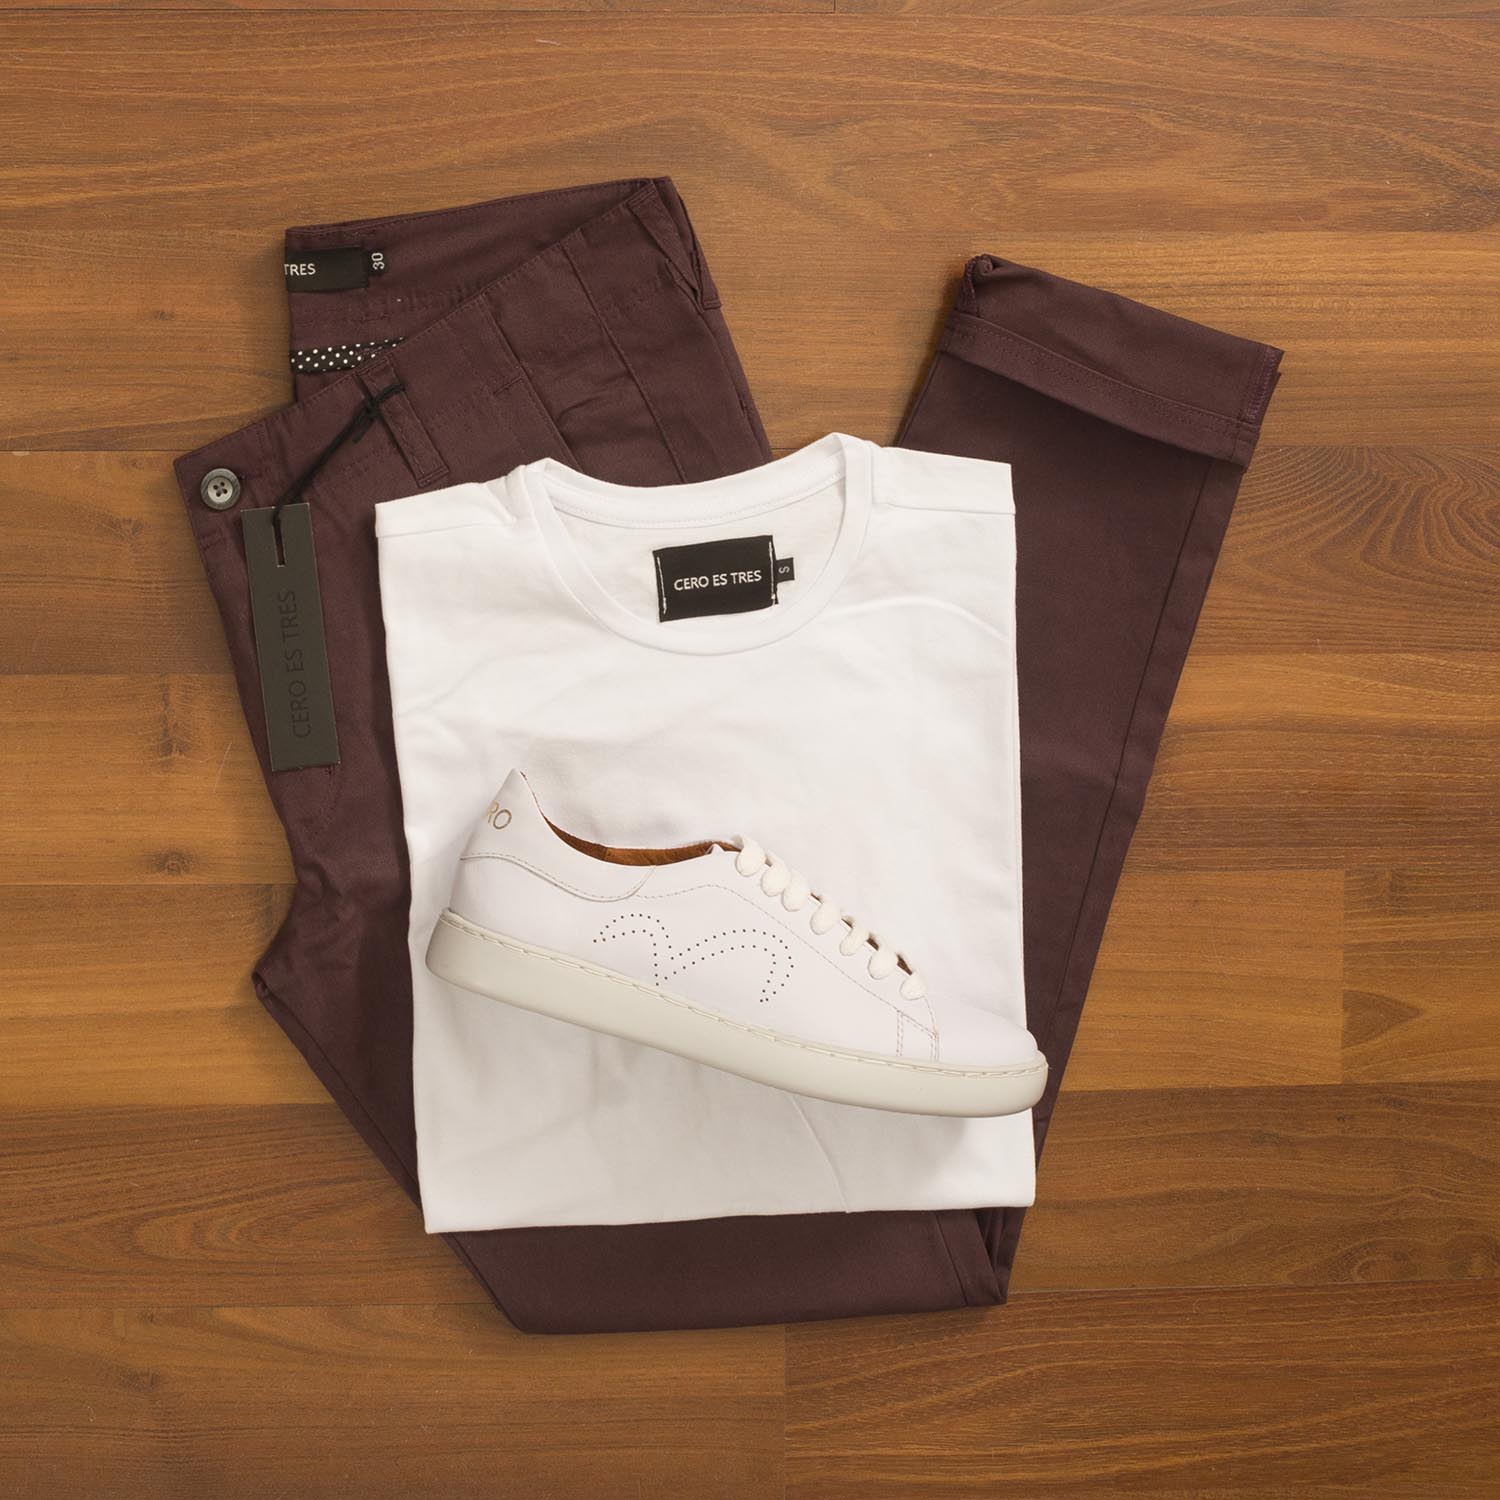 OUTFIT CERO 227